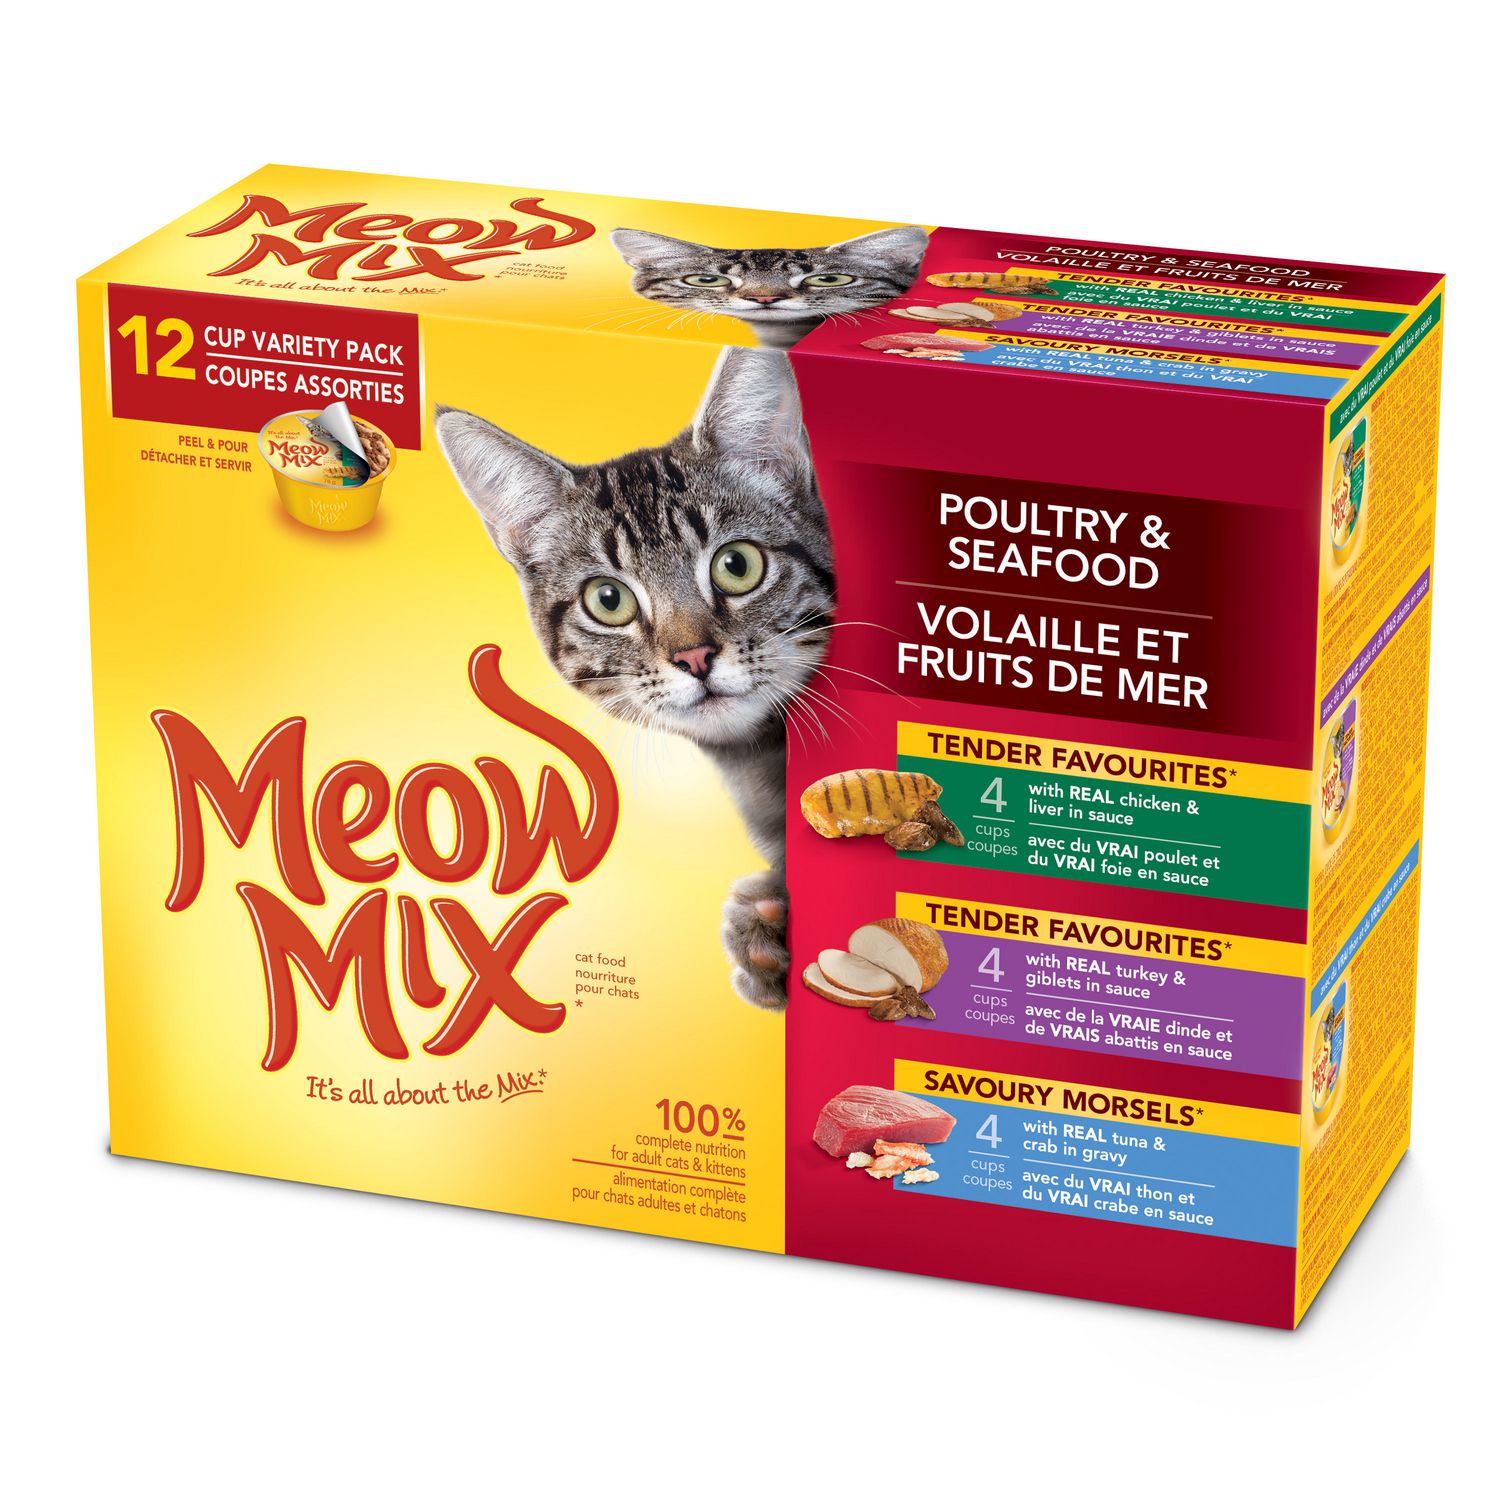 Meow Mix Poultry & Seafood Cat Food Variety 12 Pack Walmart Canada